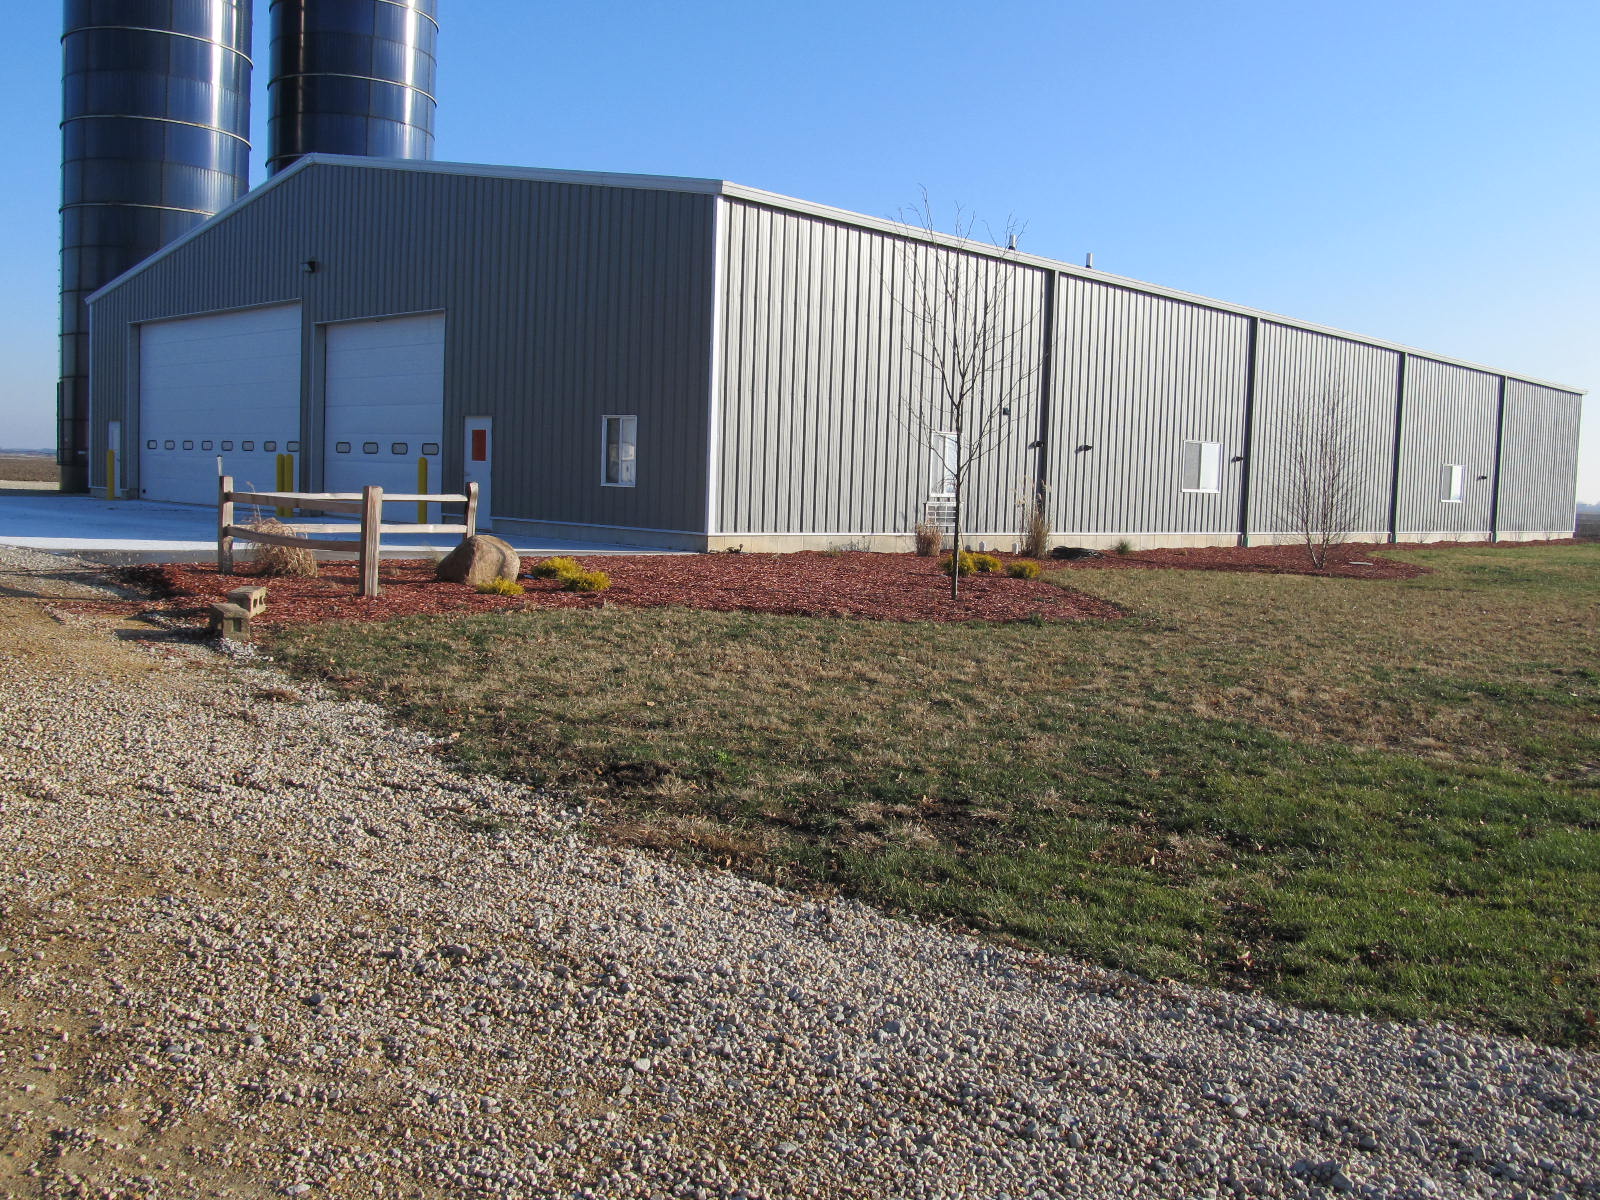 Steel Ag Building with gray wall panels